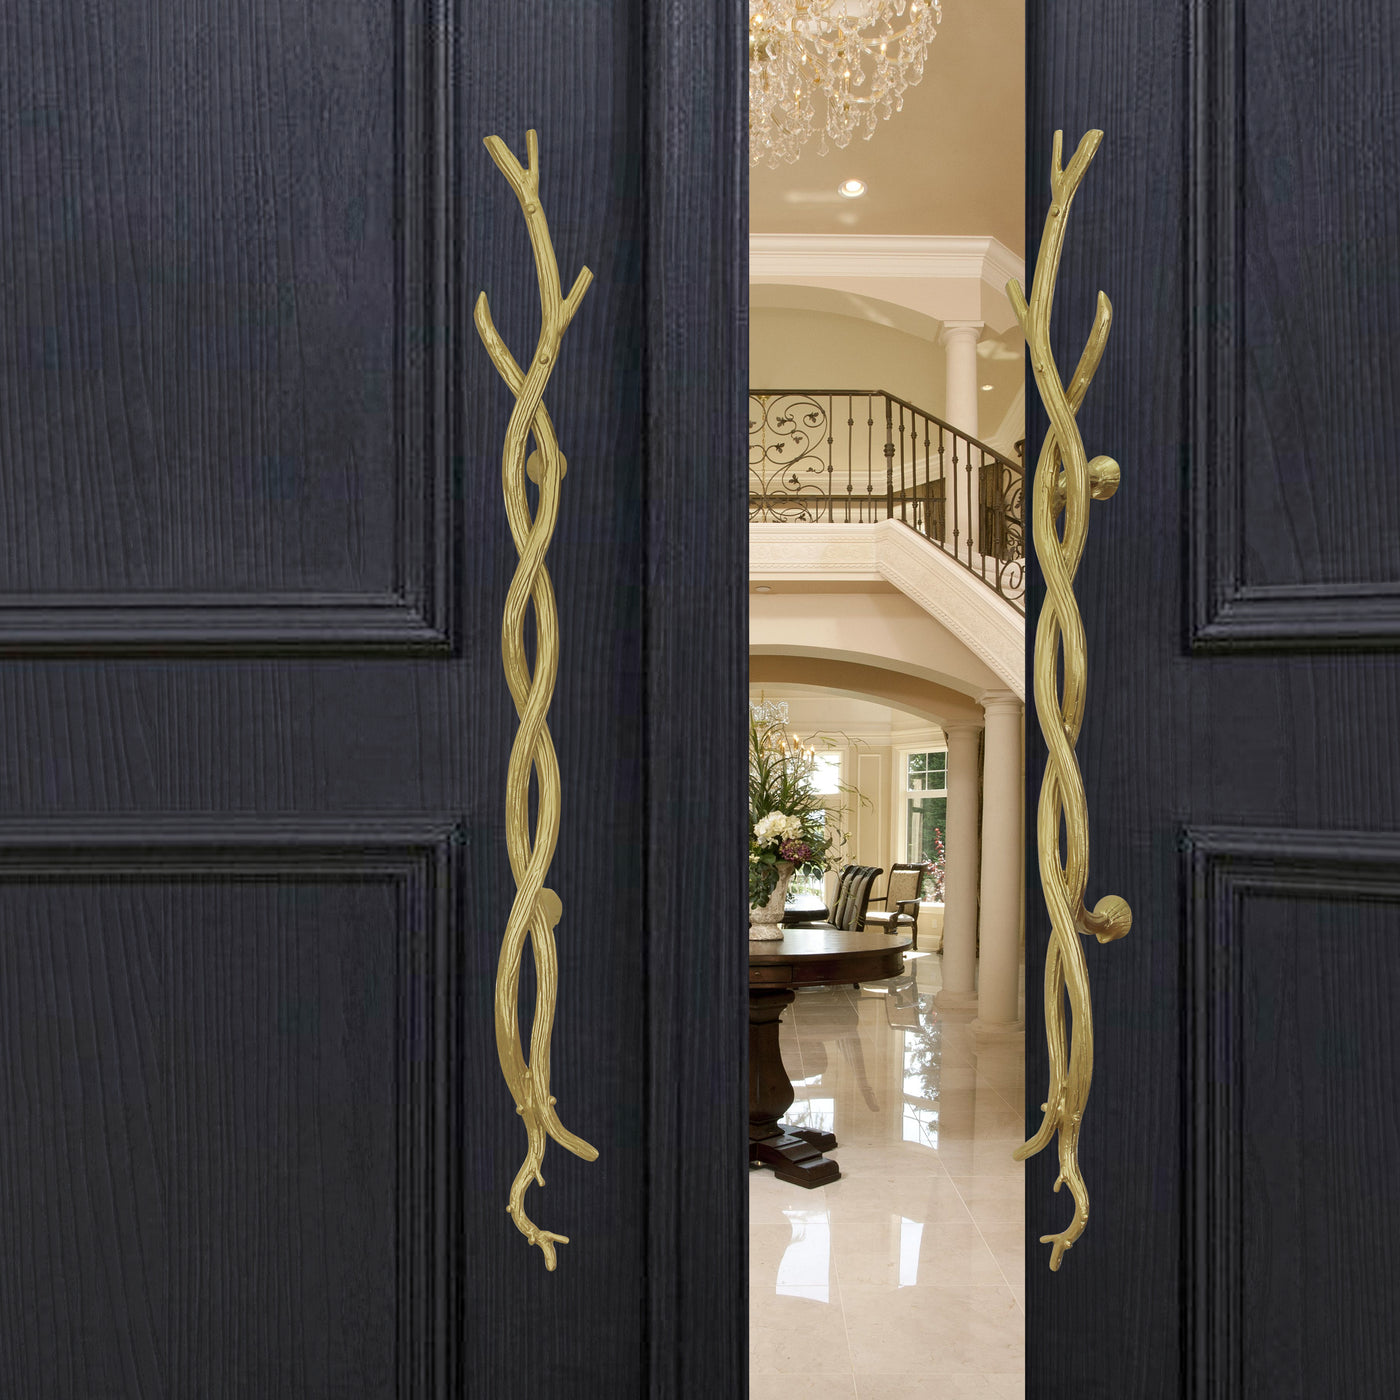 A pair of accent golden pull handles inspired by twisted branches mounted on an open wooden door